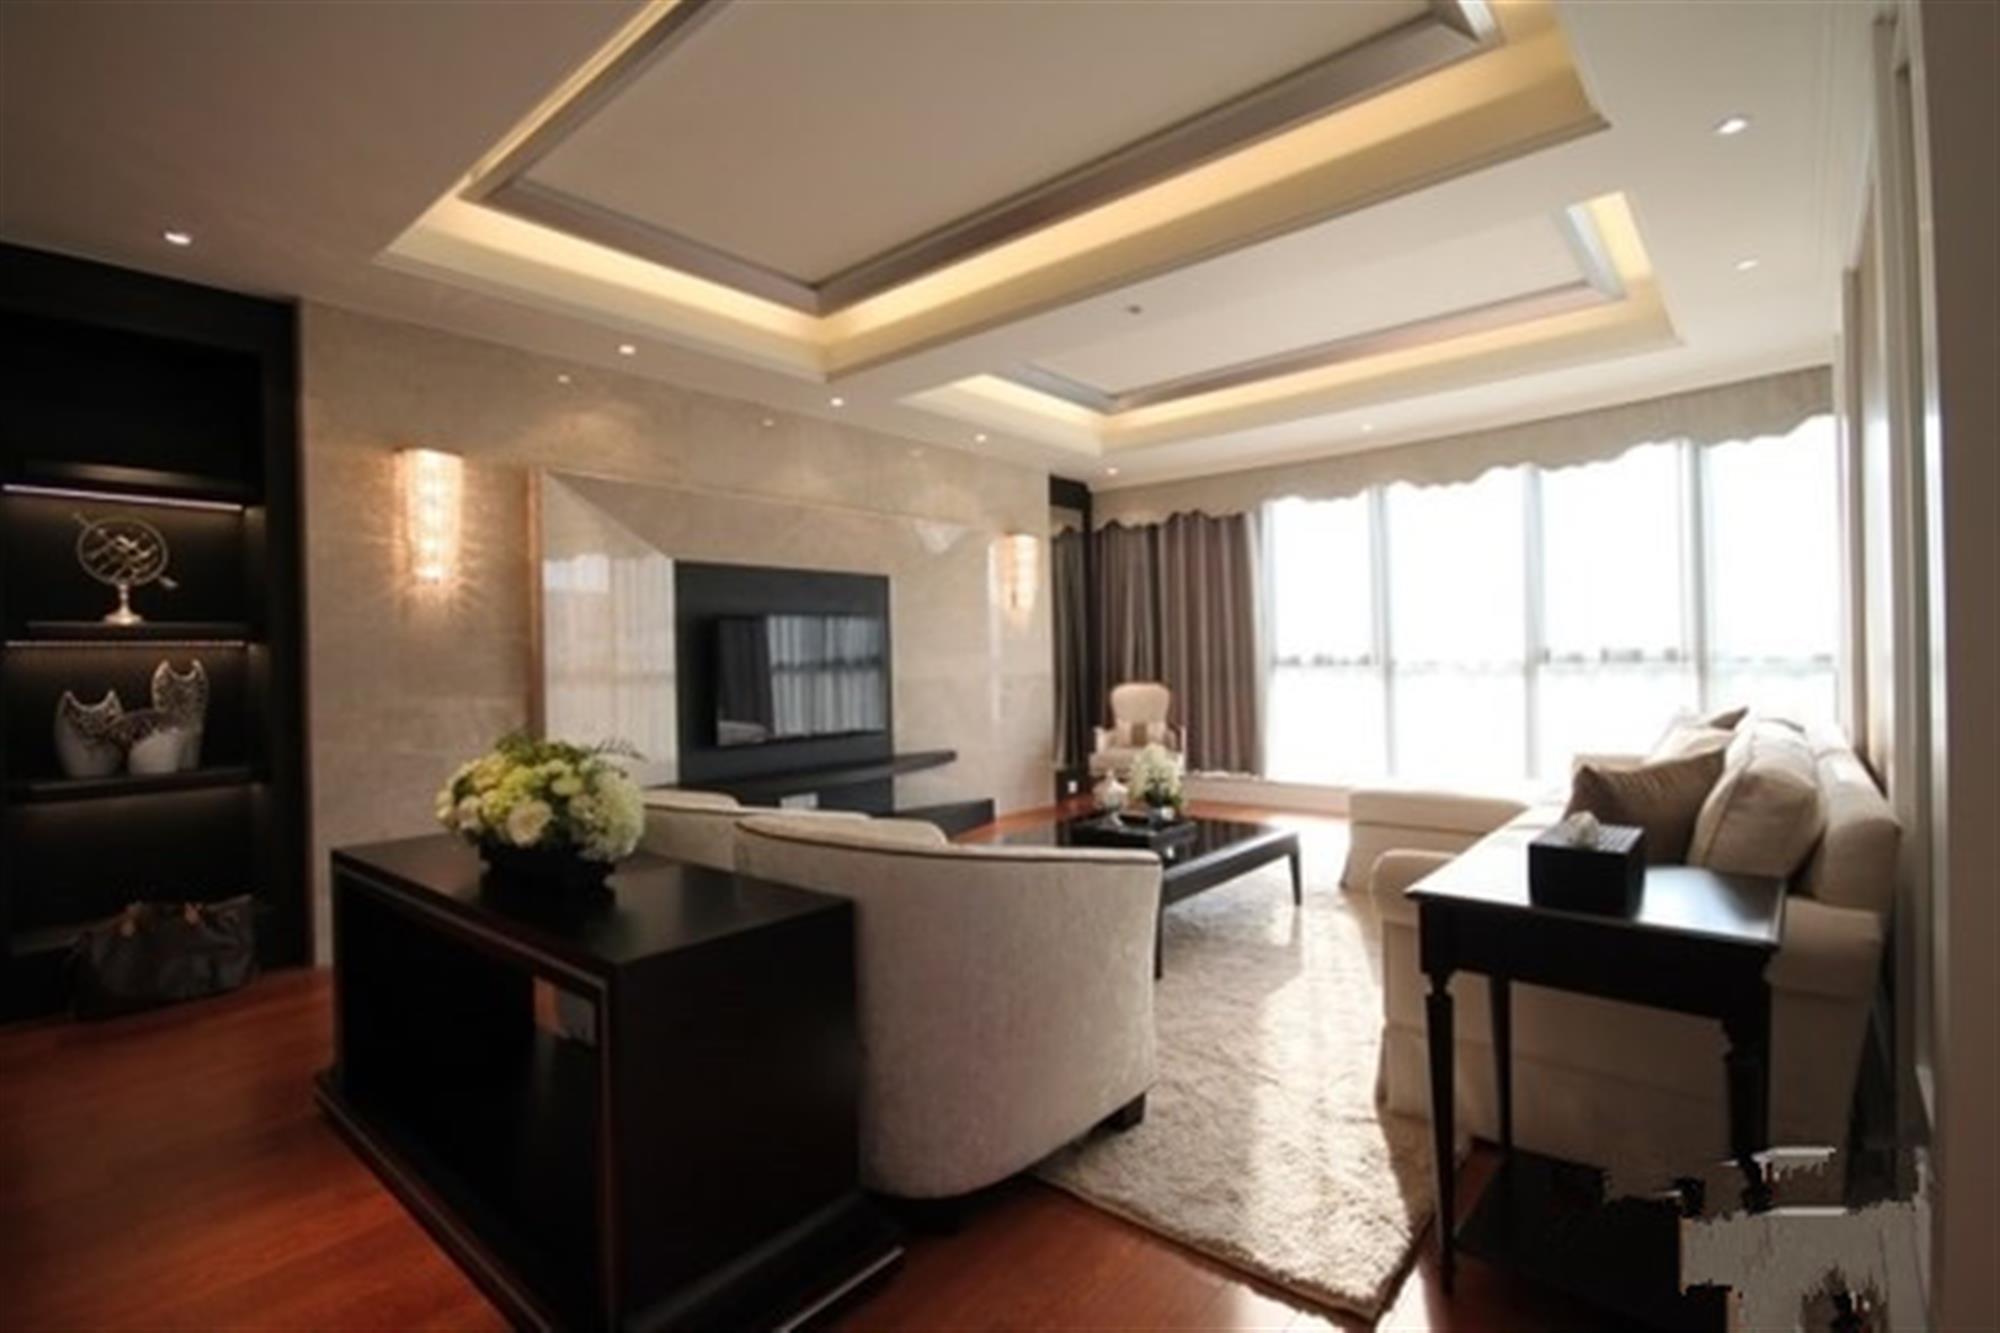 New LARGE LUX Hongqiao Apartment in Shanghai for Rent